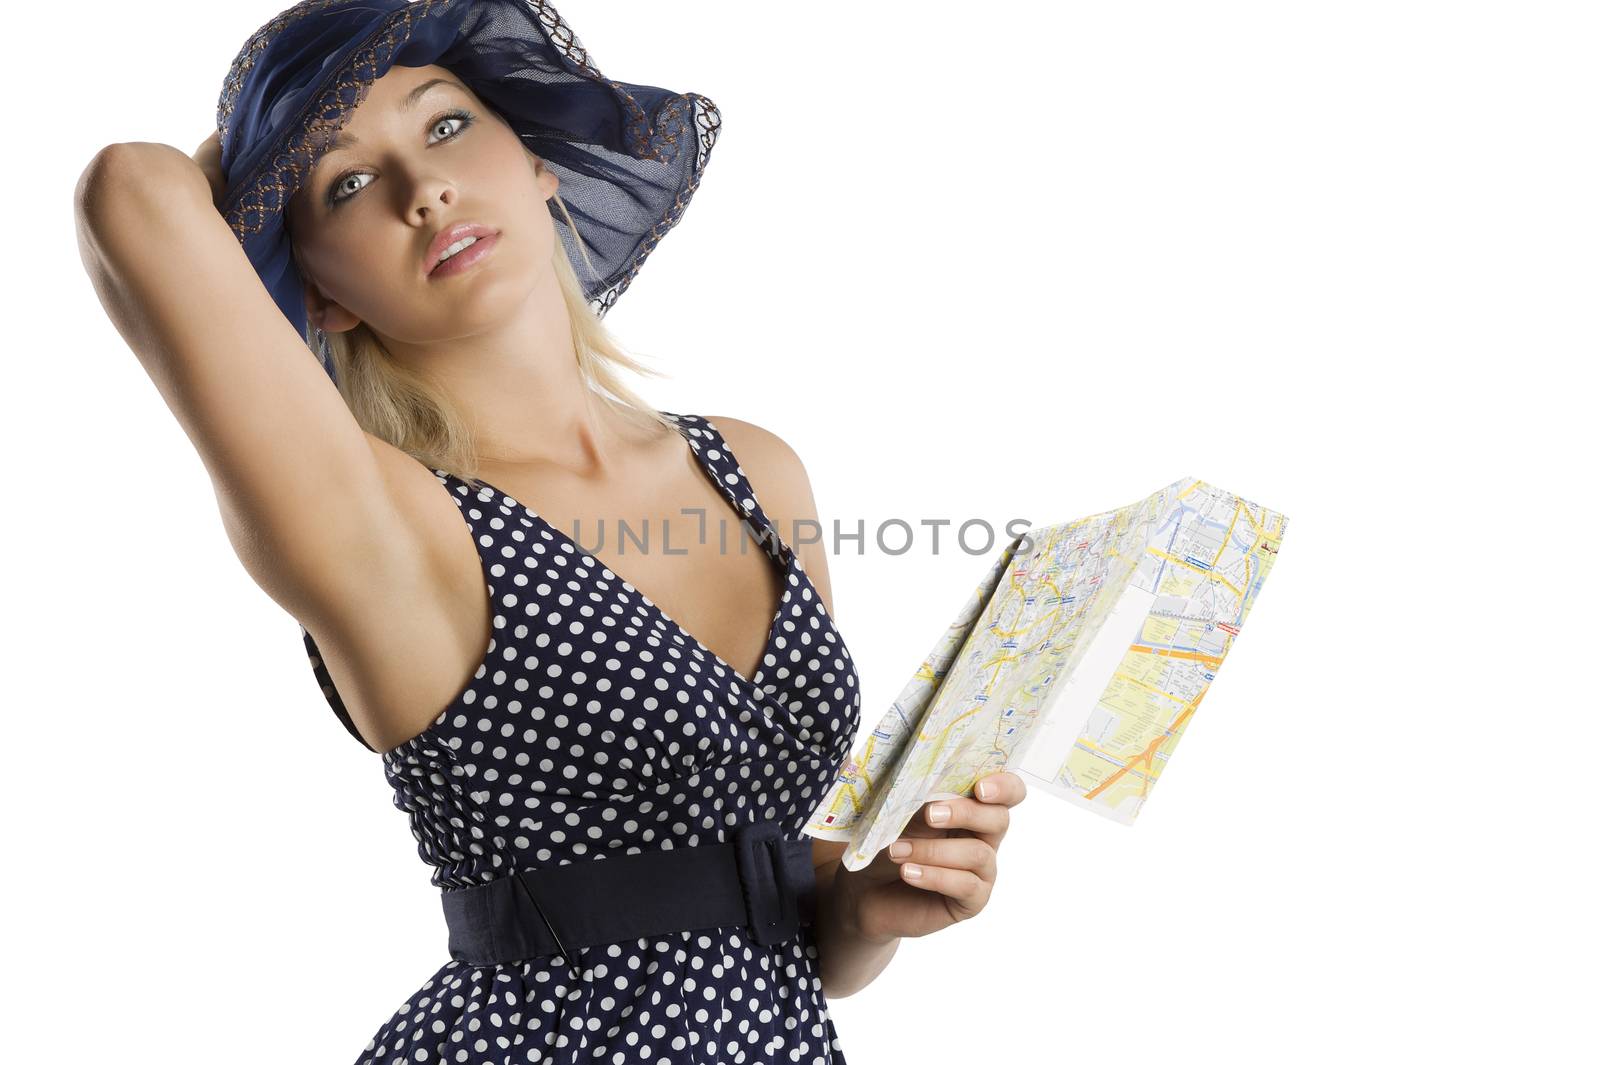 elegant woman in blue polka dot dress and hat looking at a tourist map